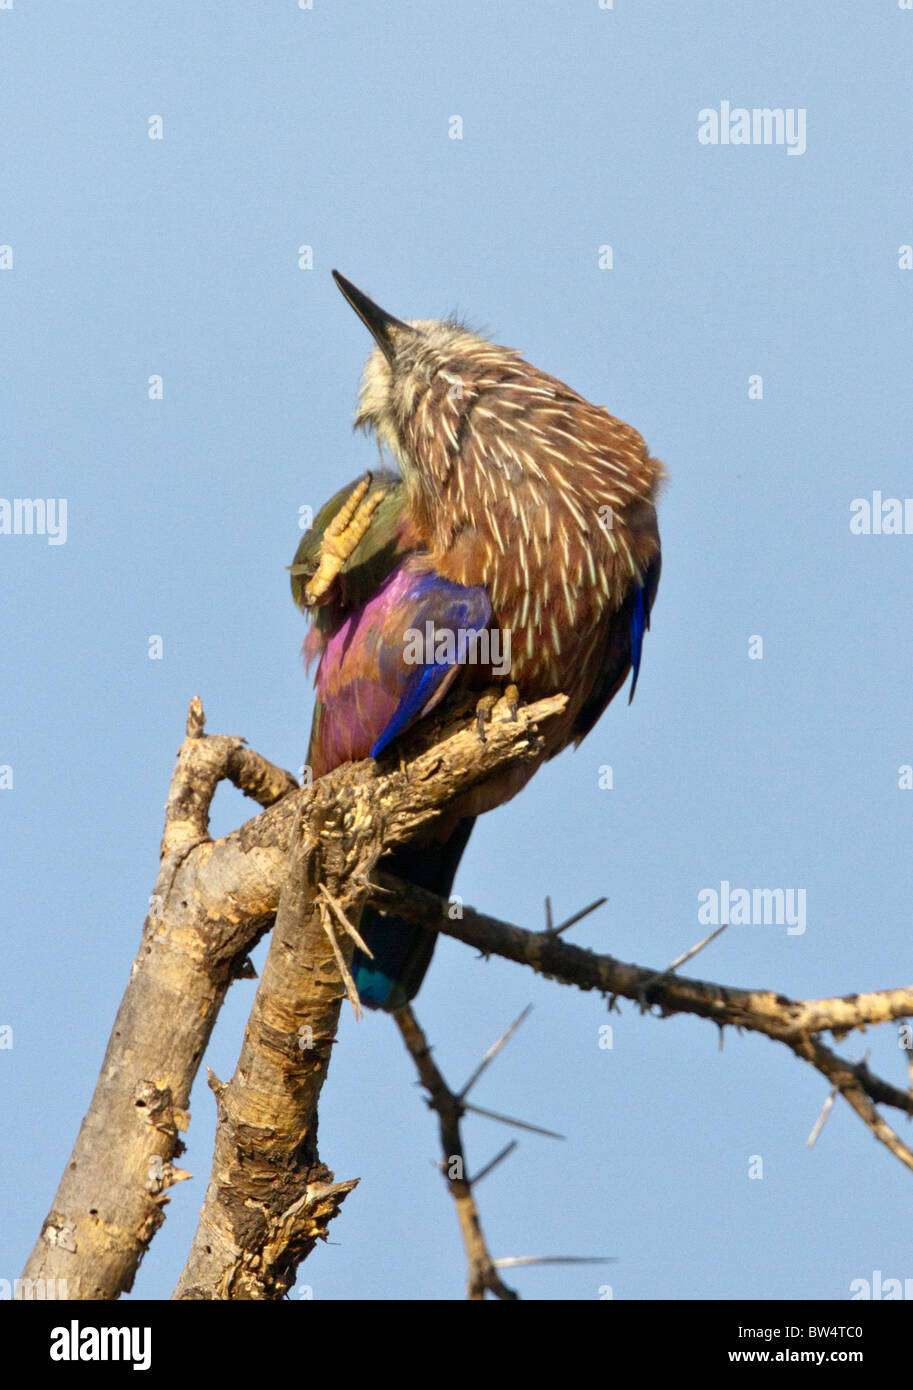 Rufous-crowned roller (Coracias naevia) formerly known as the purple roller, scratching itself Stock Photo